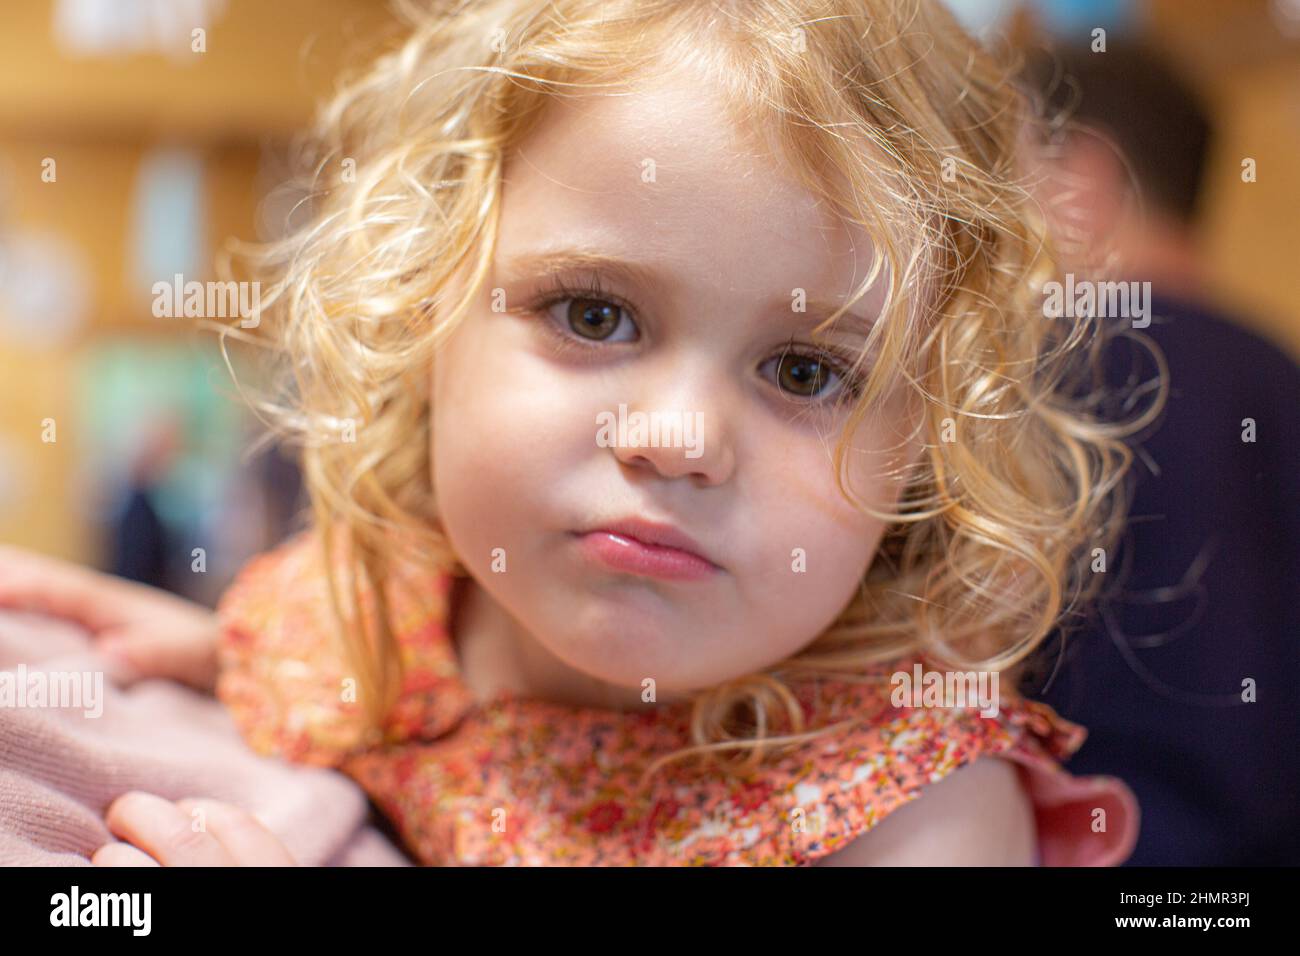 Portrait of a 3 year old girl. Stock Photo